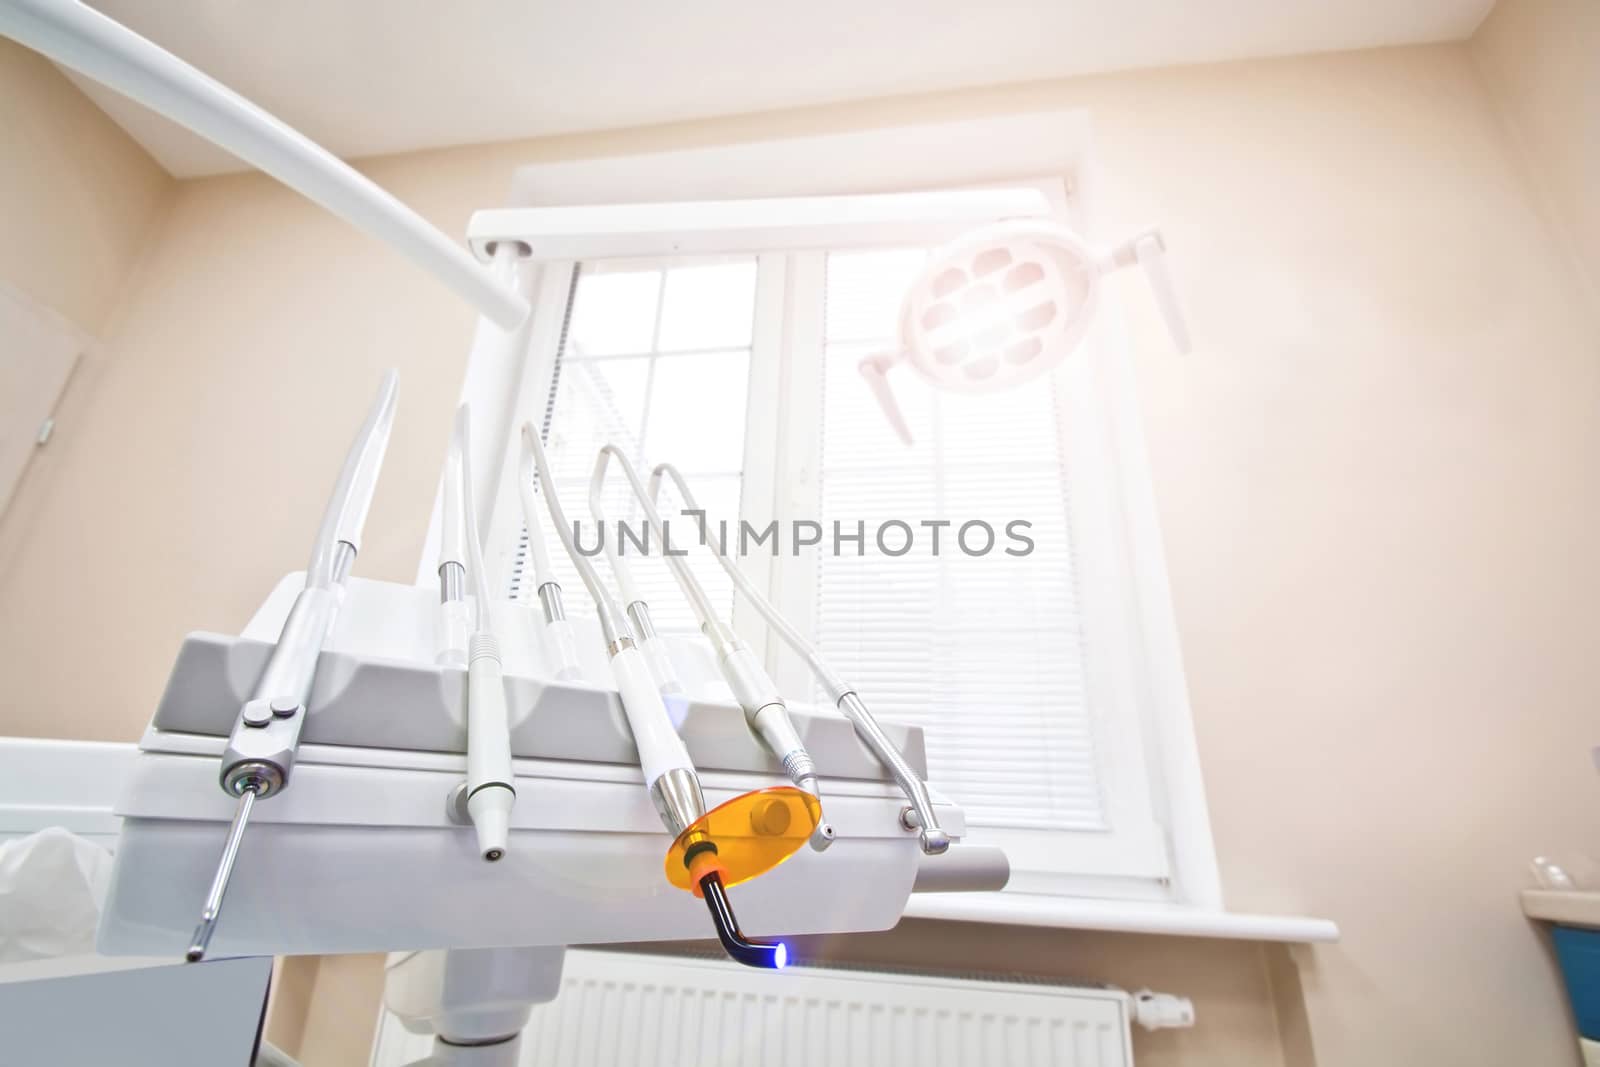 Professional Dentist tools in the dental office. Dental Hygiene and Health conceptual image.